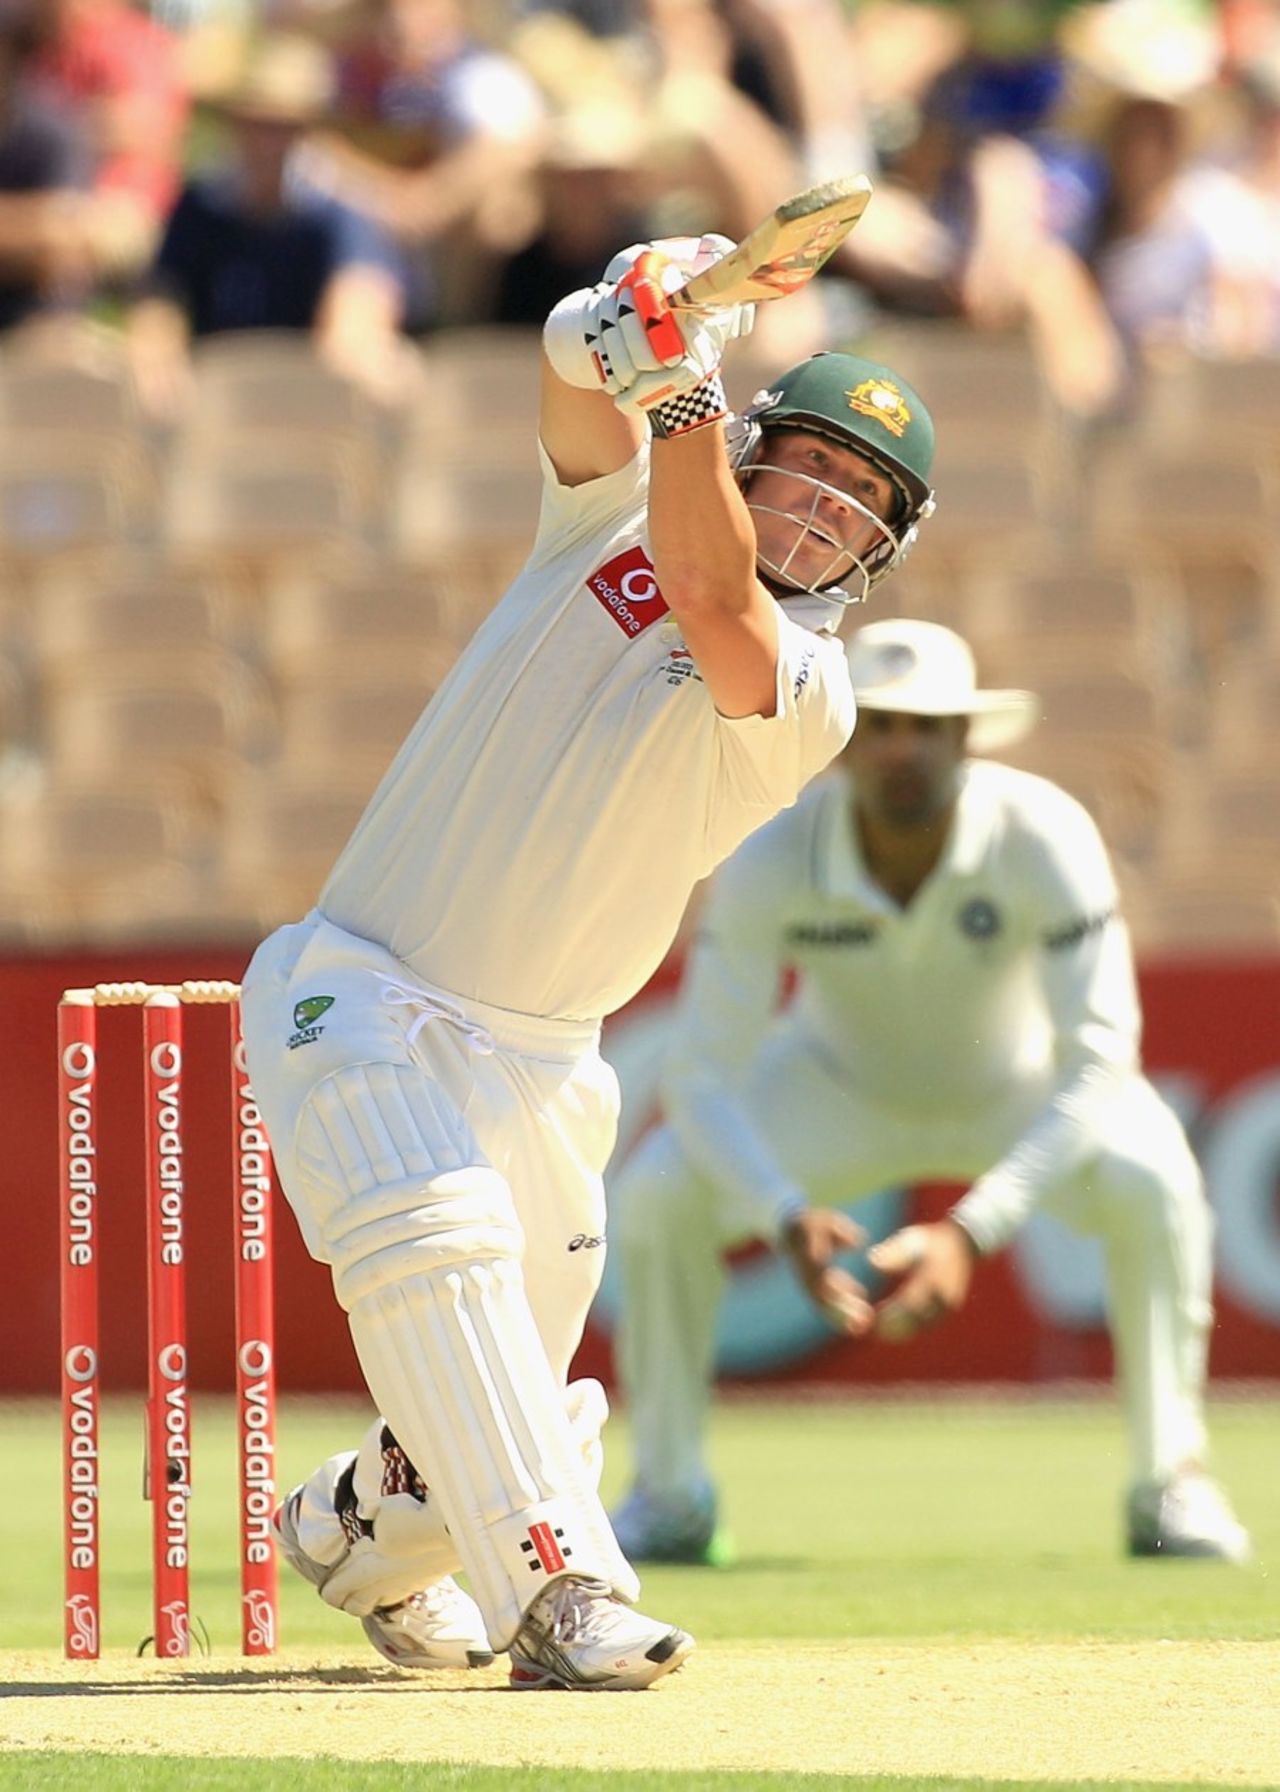 David Warner drives aerially down the ground, Australia v India, 4th Test, Adelaide, 1st day, January 24, 2012